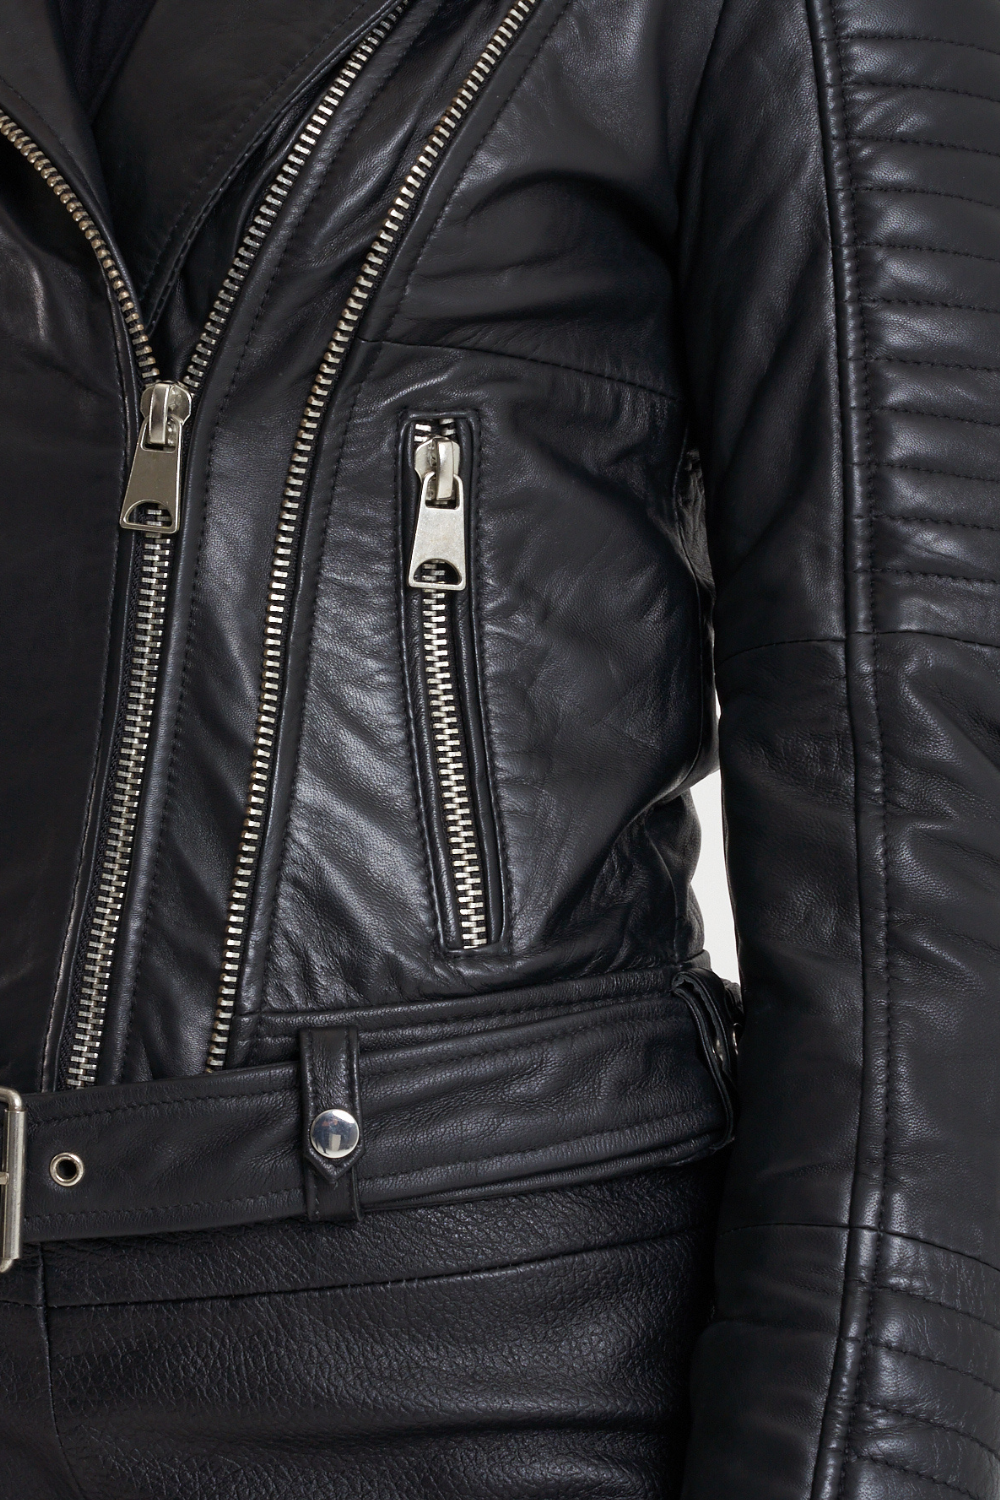 This leather jacket features all the hallmarks of an iconic racer jacket; tab neck collar, adjustable waistbelt and asymmetric zipline. This gorgeous piece also features unique ribbed shoulder detailing that is wadded for extra dimension.